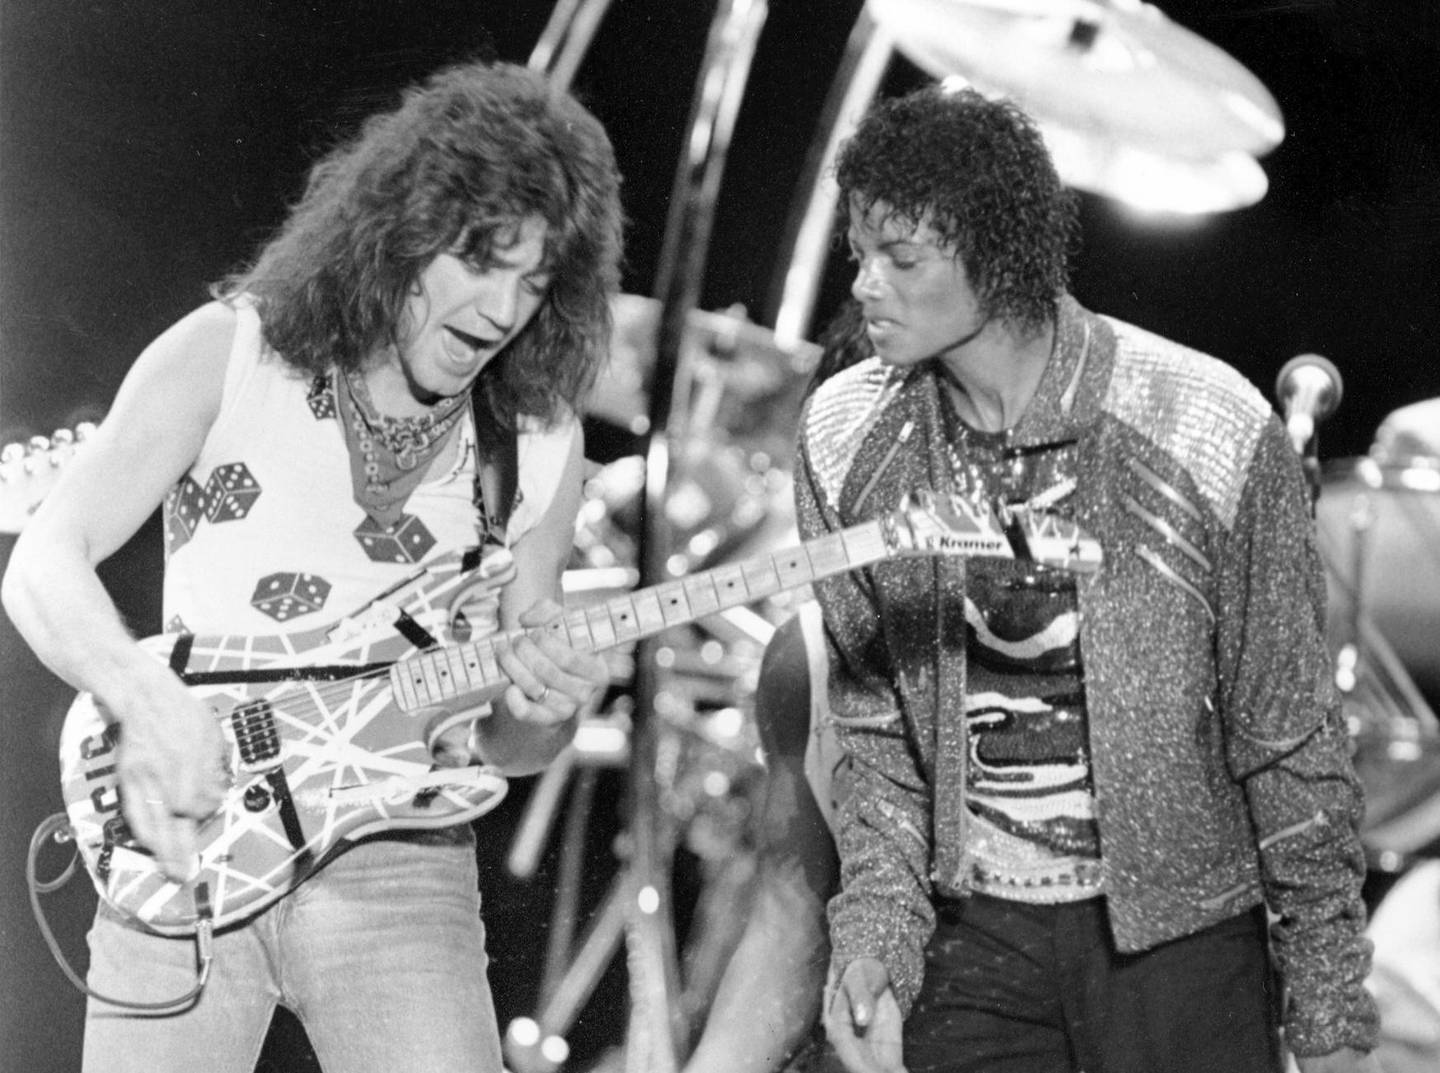 FILE - This July 14, 1984 file photo shows Van Halen guitarist Eddie Van Halen, left, performing "Beat It" with Michael Jackson during Jackson's Victory Tour concert in Irving, Texas. Van Halen, who had battled mouth cancer, died Tuesday, Oct. 6, 2020. He was 65. (AP Photo/Carlos Osorio, File)